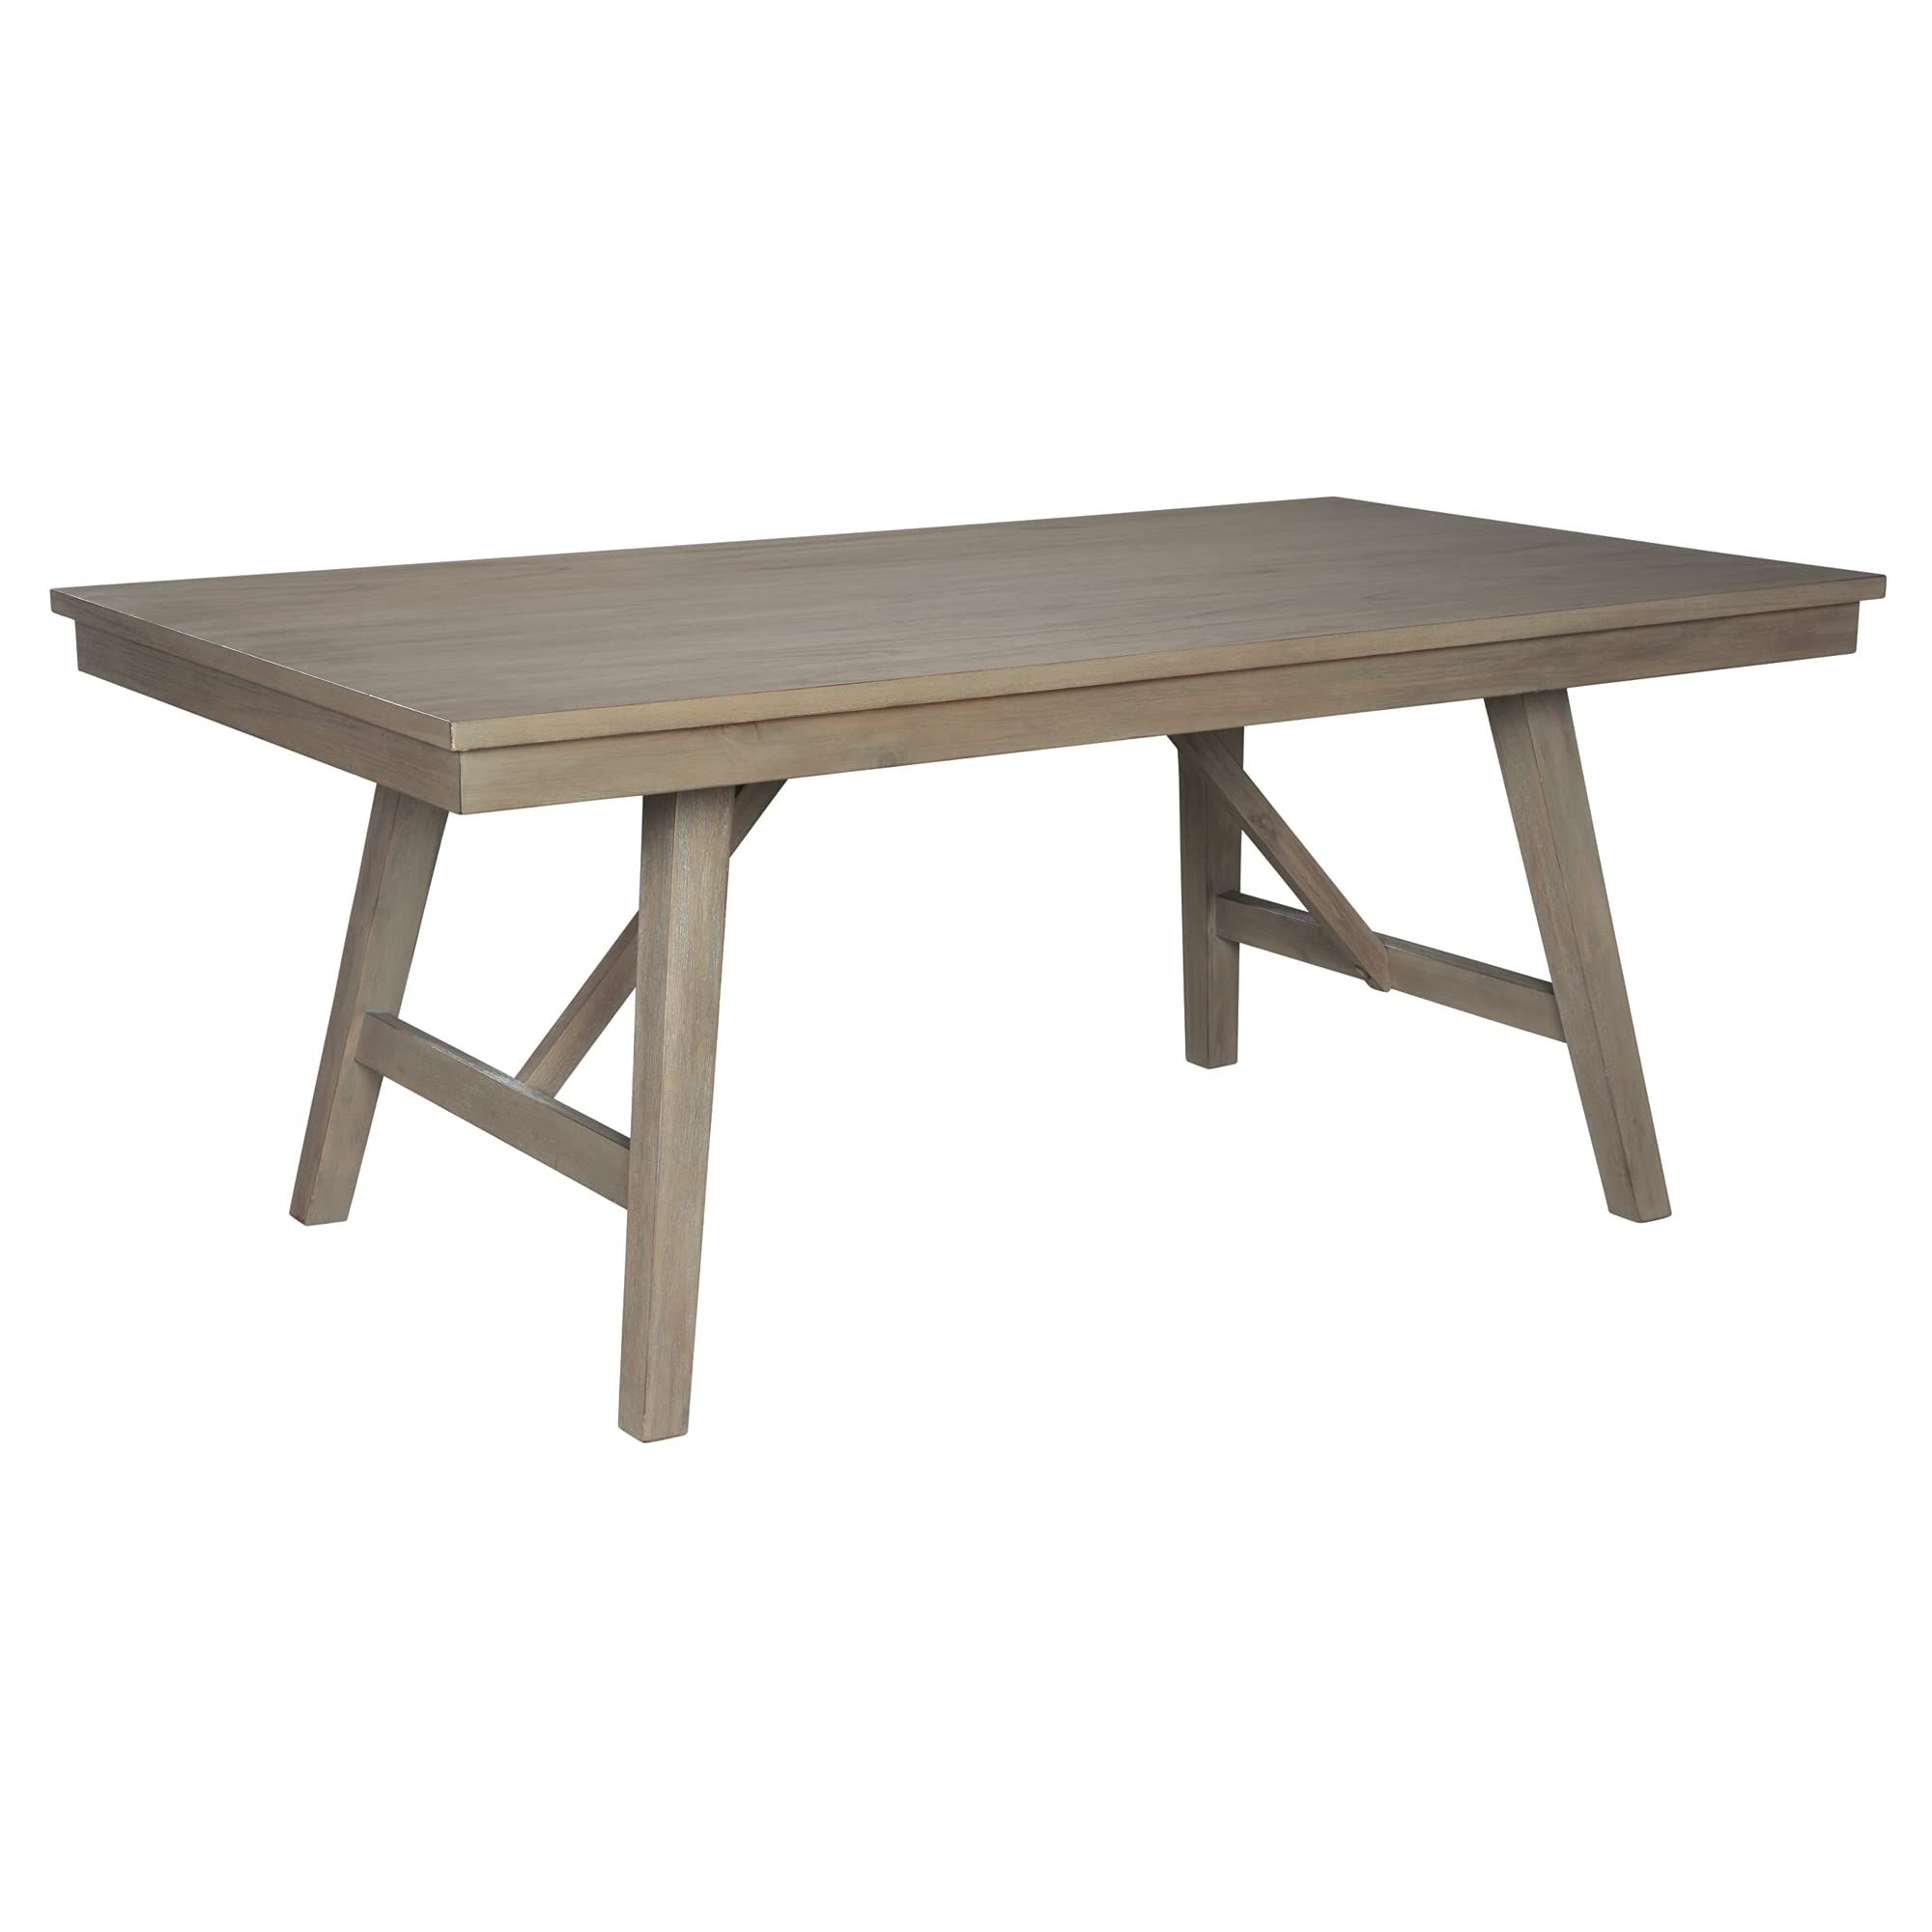 Signature Design by Ashley Aldwin Modern Farmhouse Rectangular Dining Table, Seats up to 6, Gray | Amazon (US)